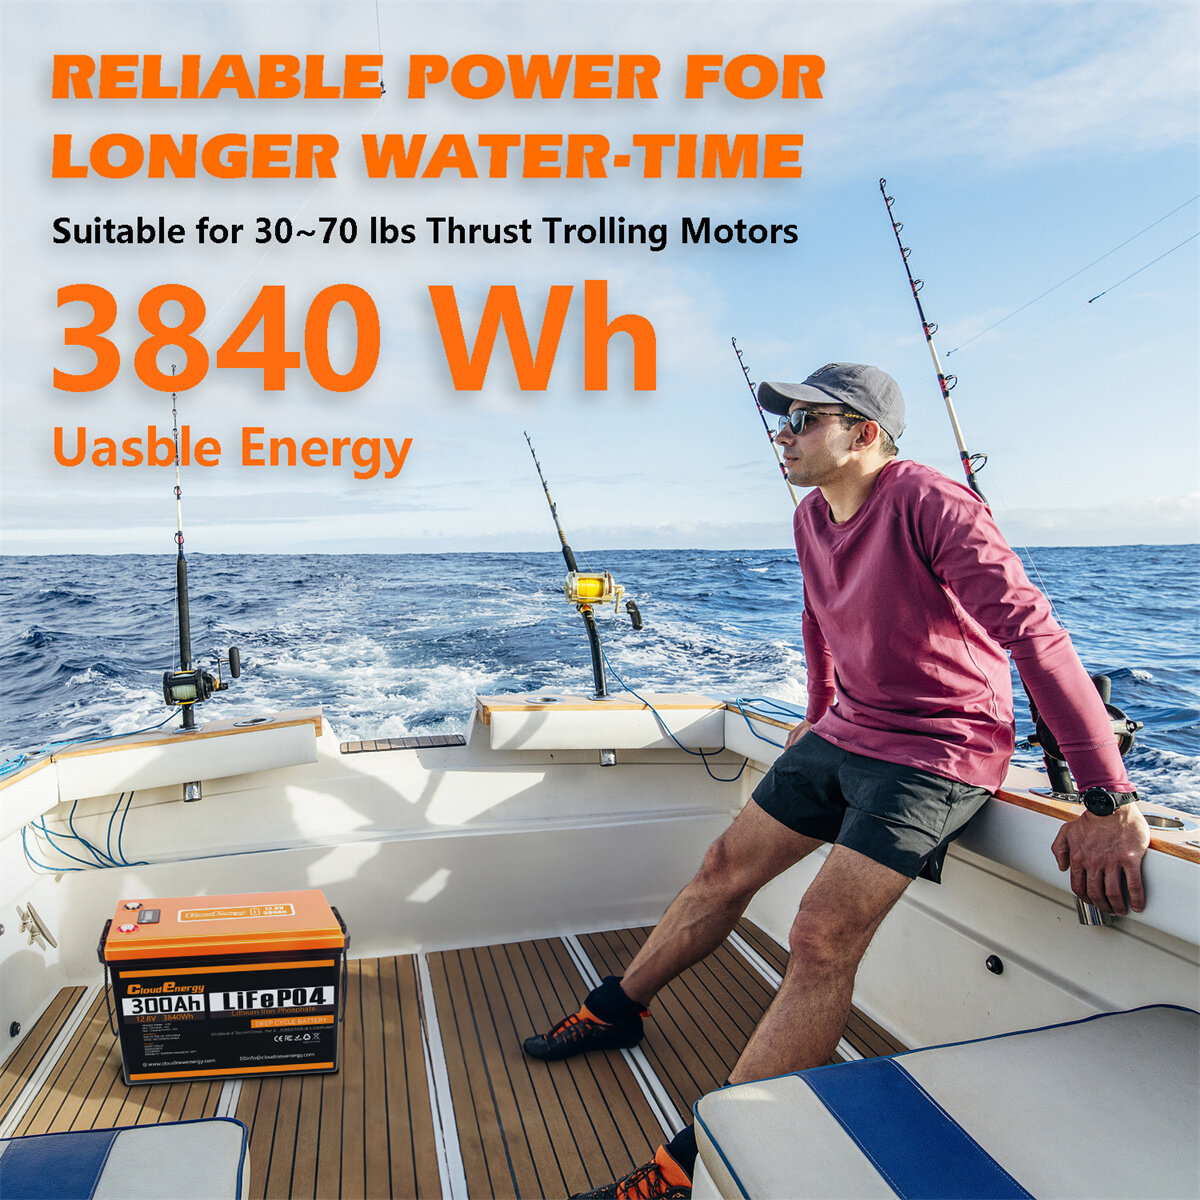 [EU DIRECT] Cloudenergy 12V 300Ah LiFePO4 Lithium Battery Pack 3.84kWh Backup Power 6000+Deep Cycles with Longer Runtime, Built-in 200A BMS, Perfect in Solar/Energy Storage System, RV, Marine, Power Bank, CL12-300B